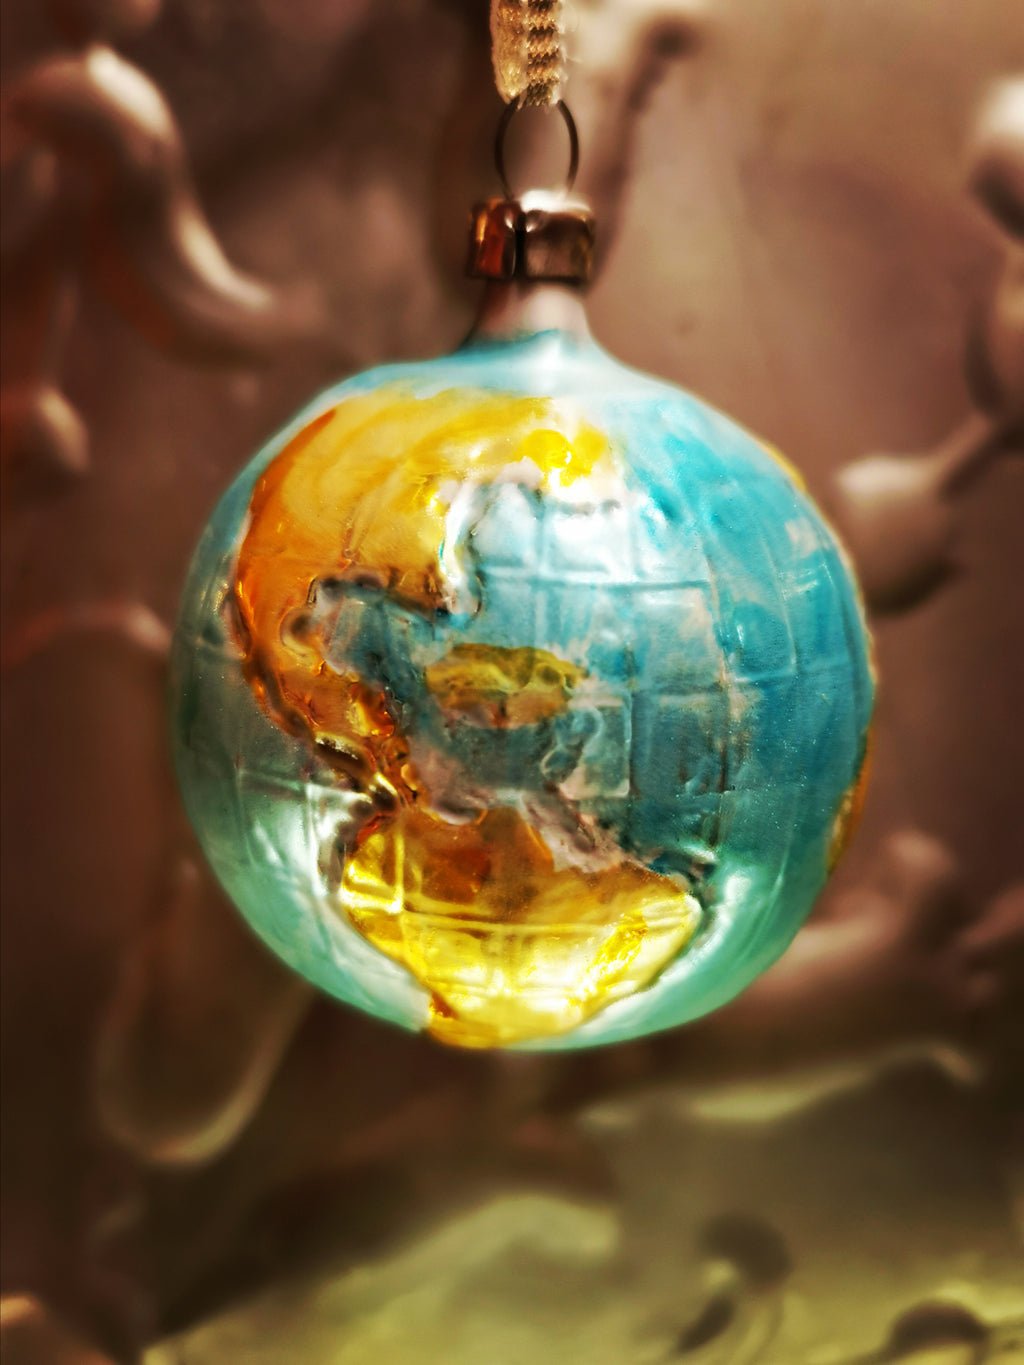 Traditional hand blown, painted glass decoration from Lauscha Germany.

This German mouth blown and lovingly hand painted glass globe decoration will bring some Christmas splendor to your house and tree.

Hand-blown/painted glass decoration

Dimensions 6cm x 6cm

